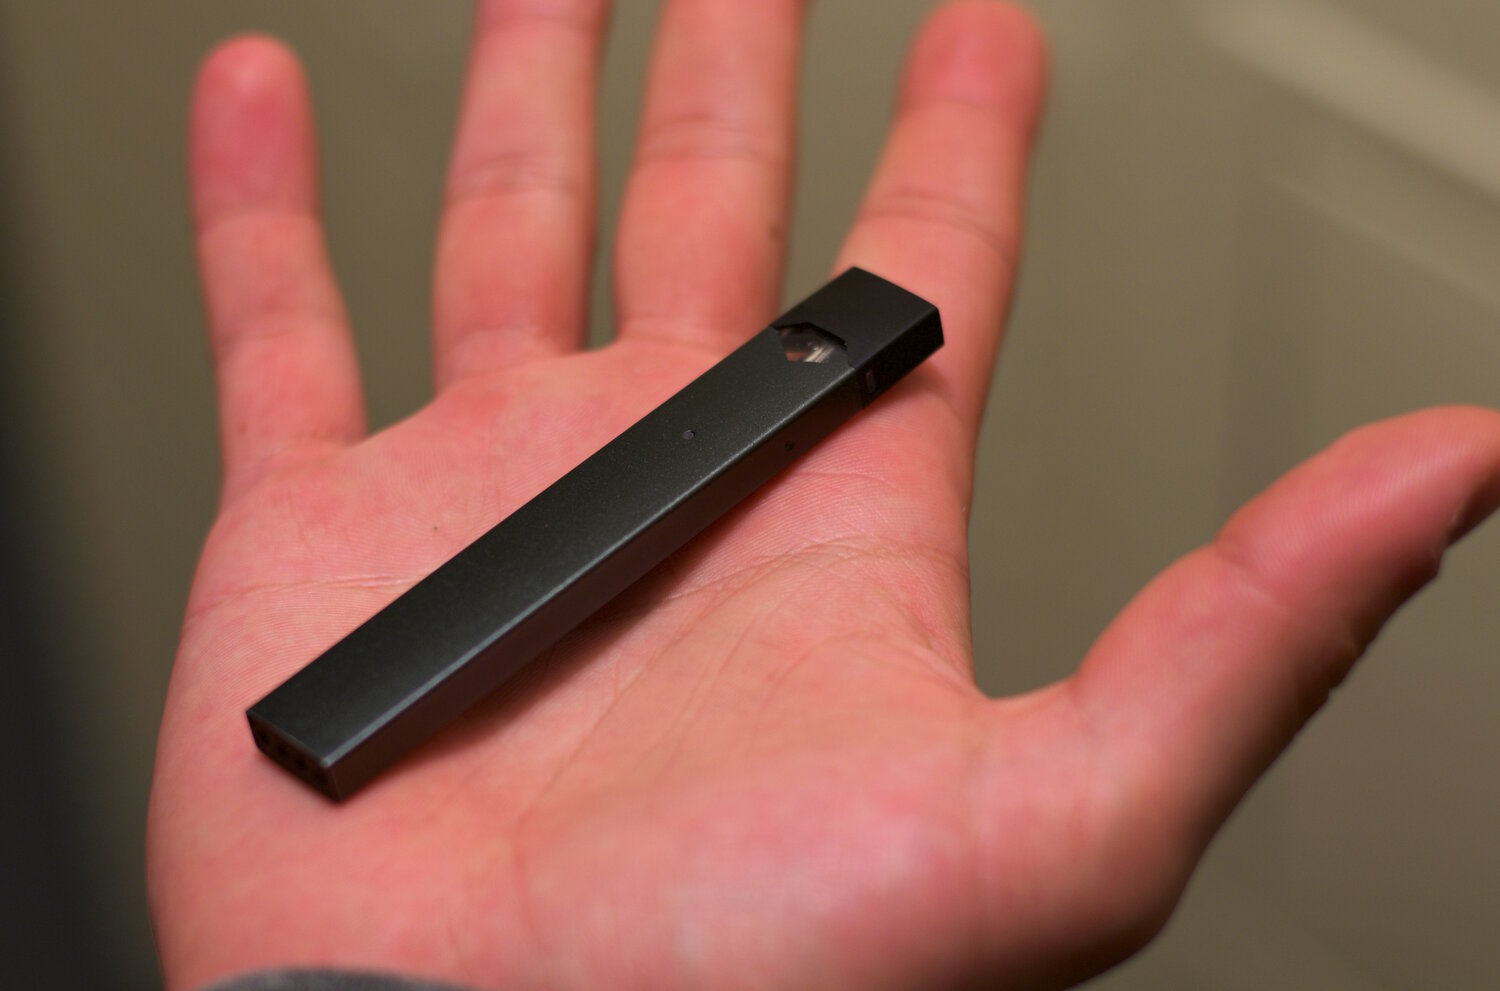 A JUUL electronic cigarette in a person's hand. Cumberland County officials said they are concerned about nicotine use in young people.